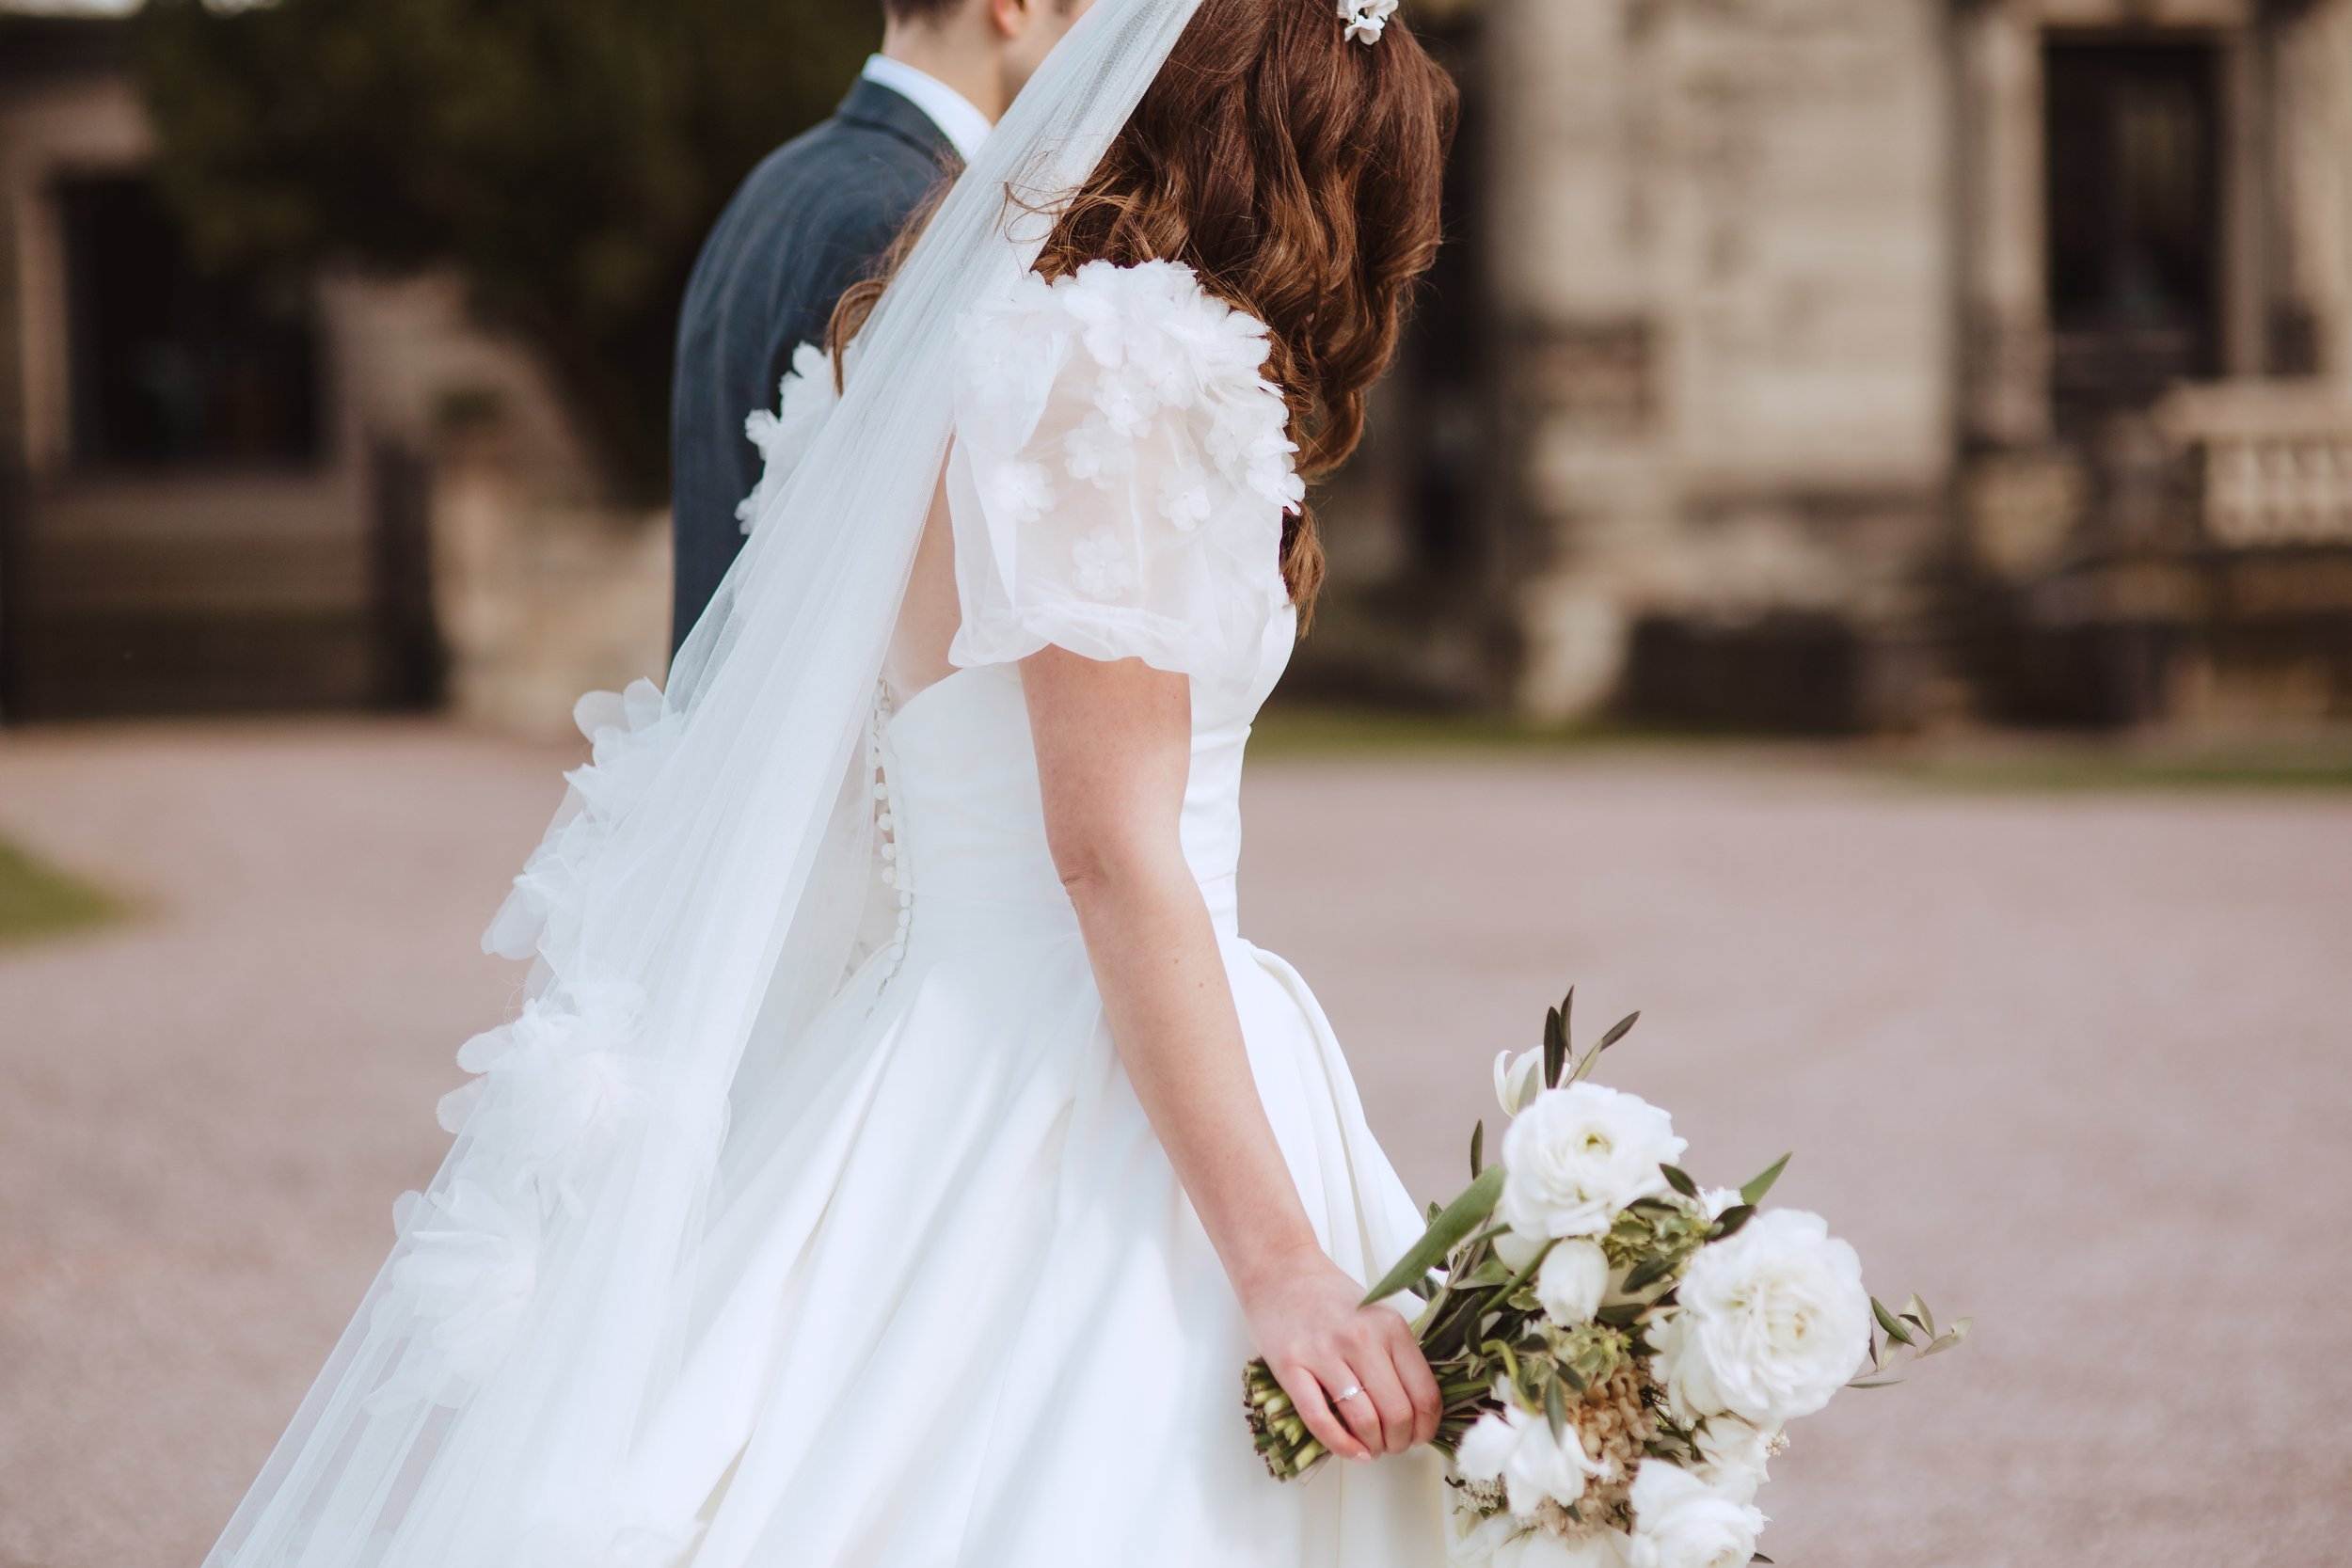 Beautiful bride Olivia wore a top and veil by Halfpenny London